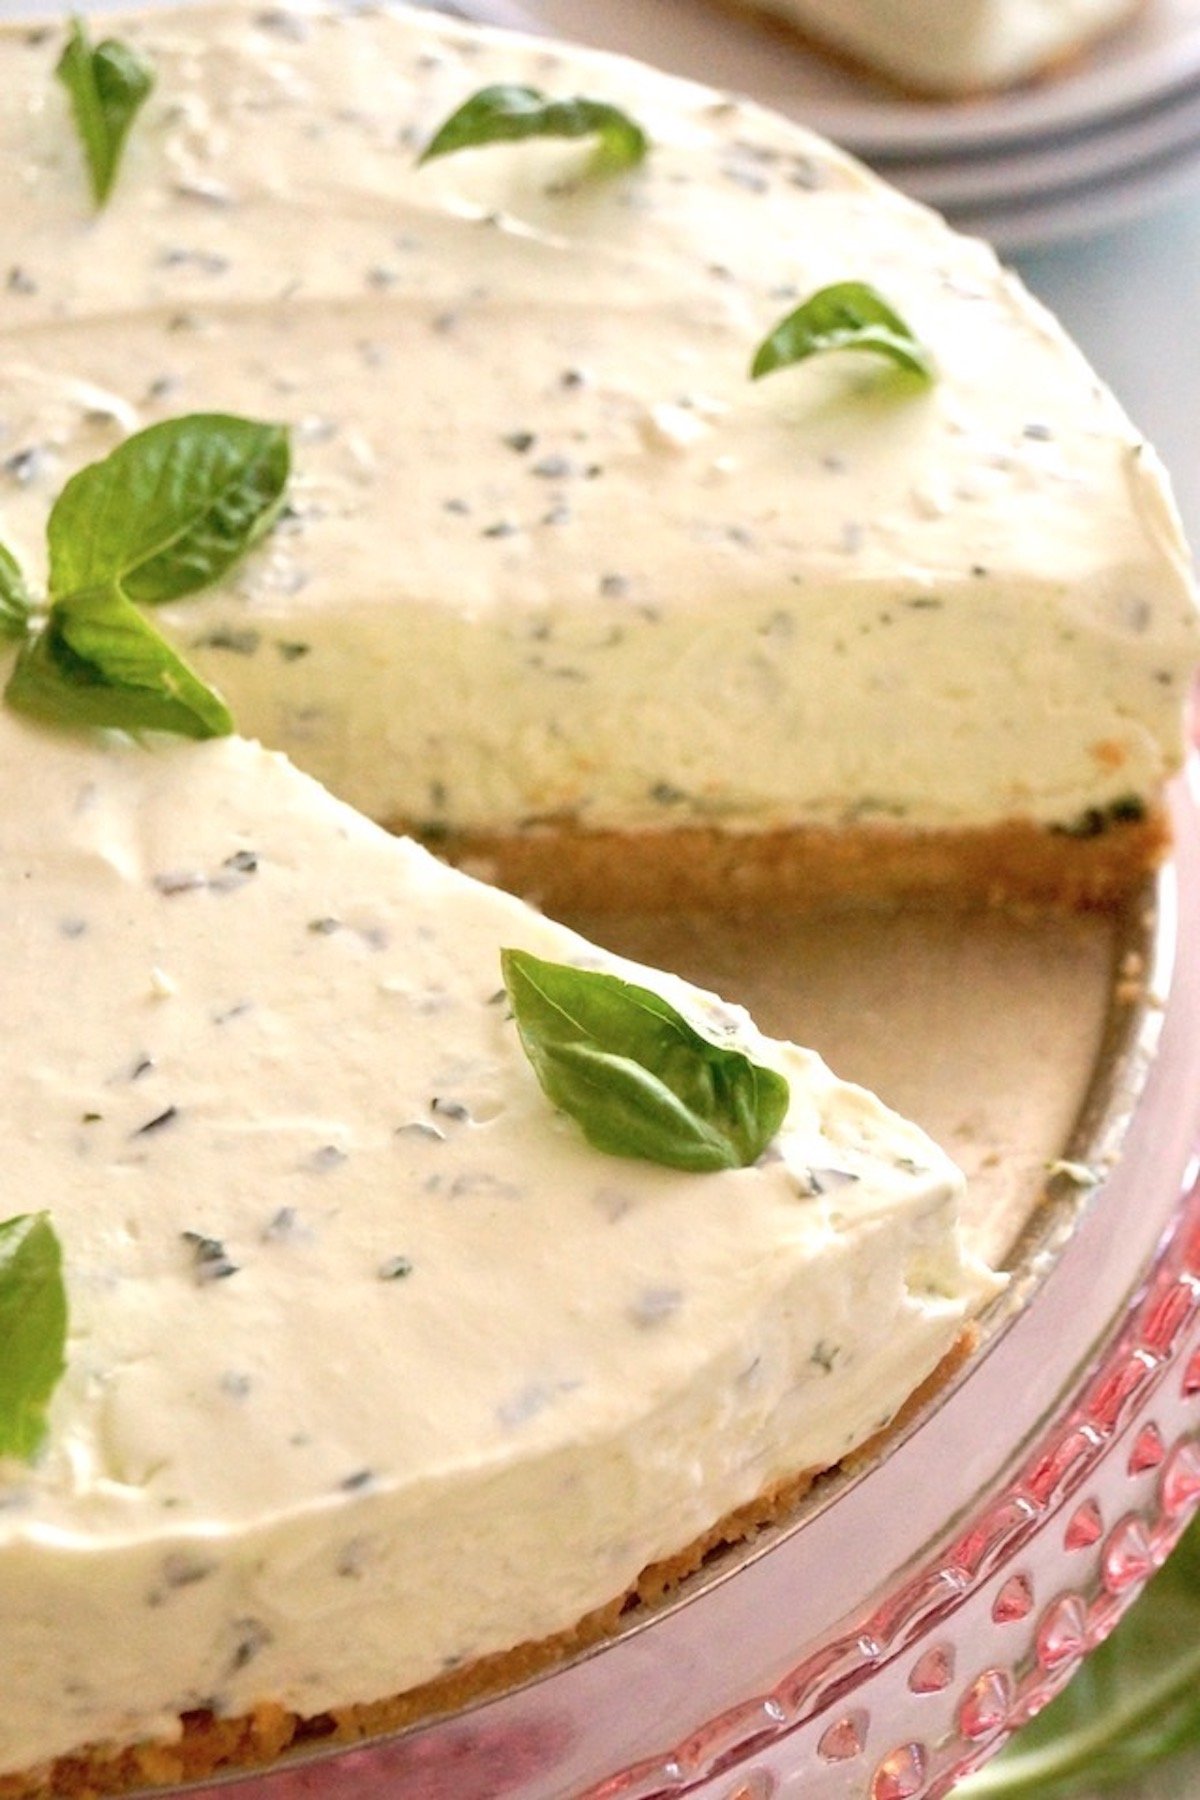 Top view, close up of a Basil Cheesecake with one slice removed and many small basil leaves on top.